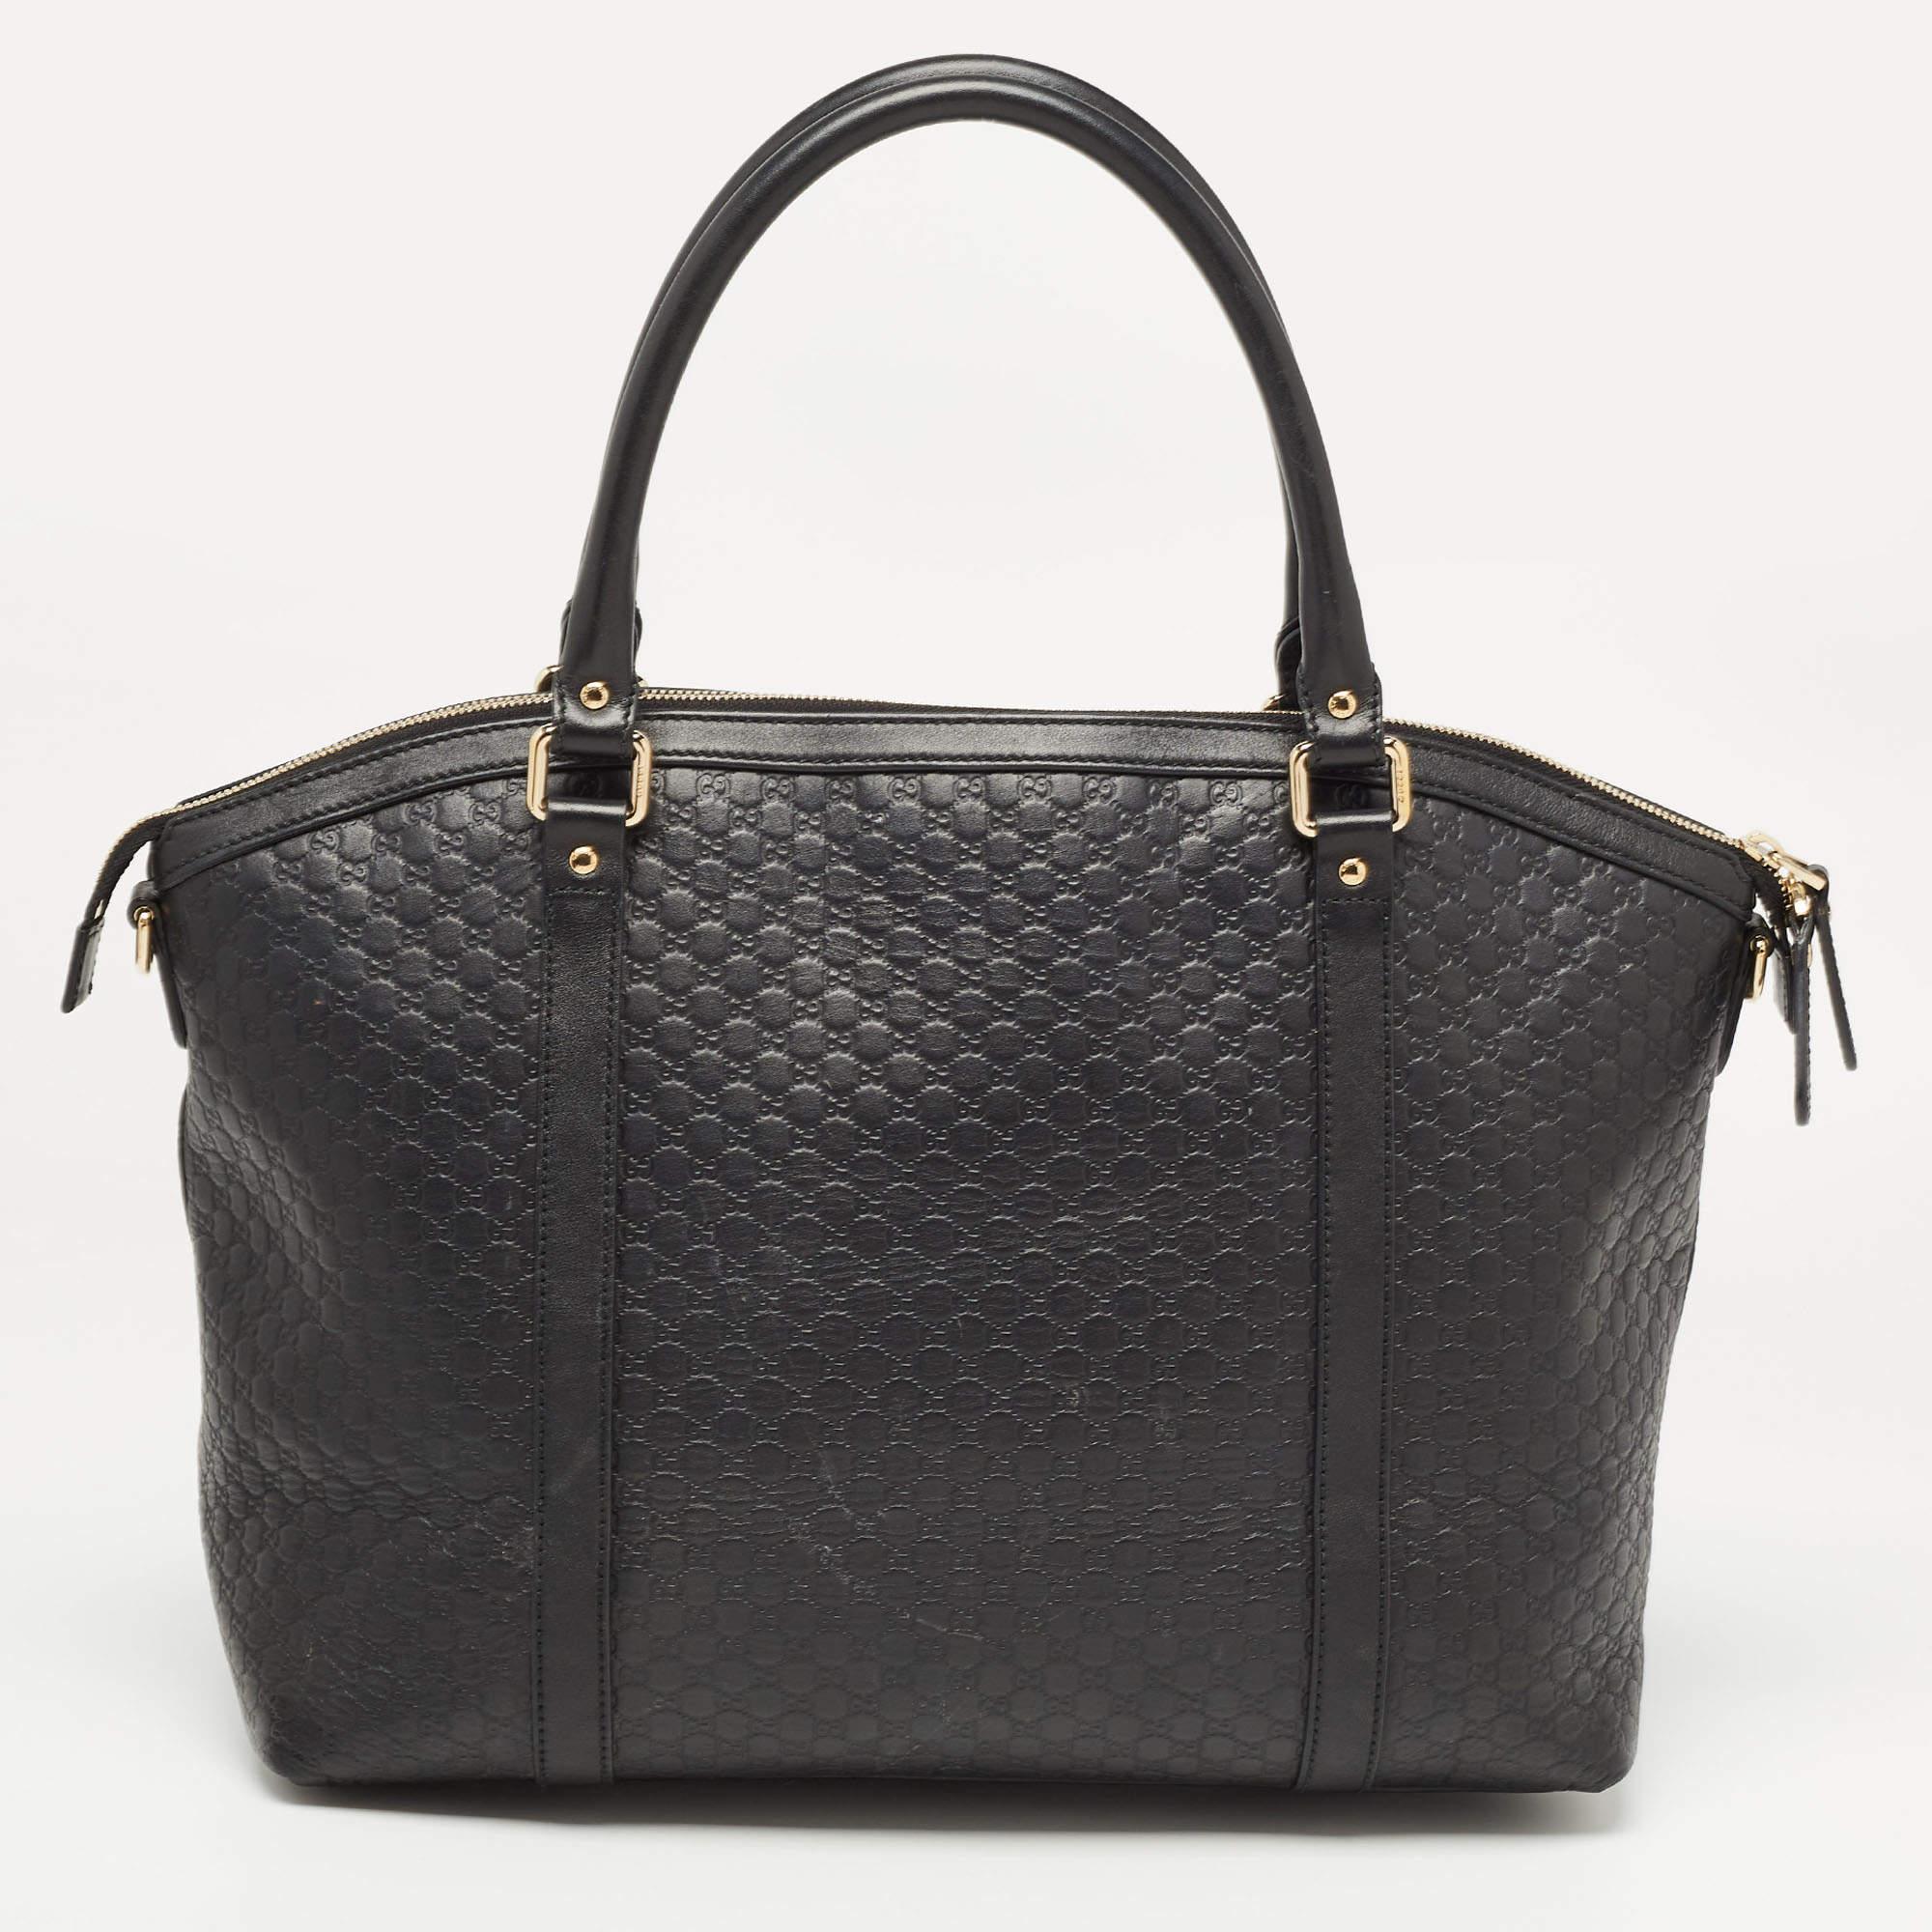 Carry everything you need in style thanks to this Gucci black leather tote. Crafted from the best materials, this is an accessory that promises enduring style and usage.

Includes: Original Dustbag, Detachable Strap